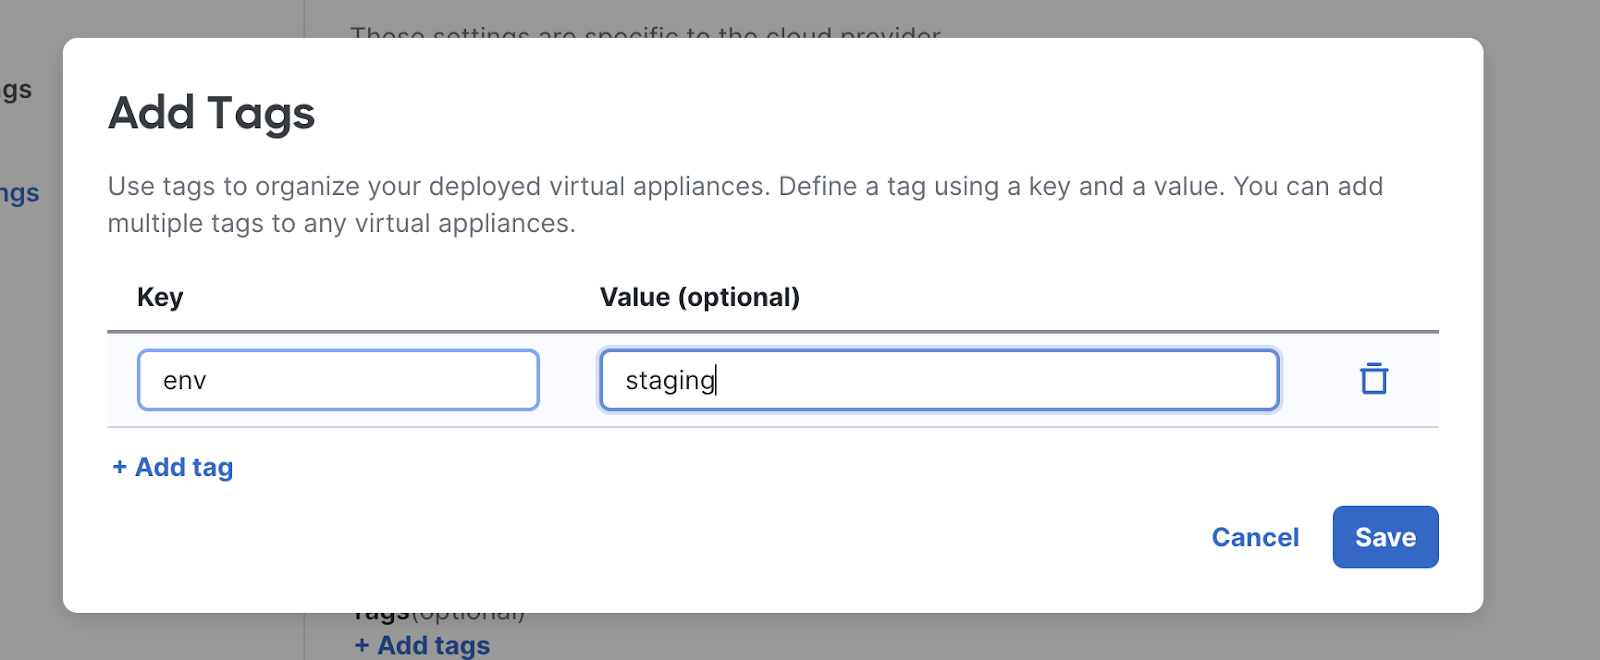 Dashboard UI Cloud Integration Add tags pop up with example Key "evn" and optional Value "staging" 